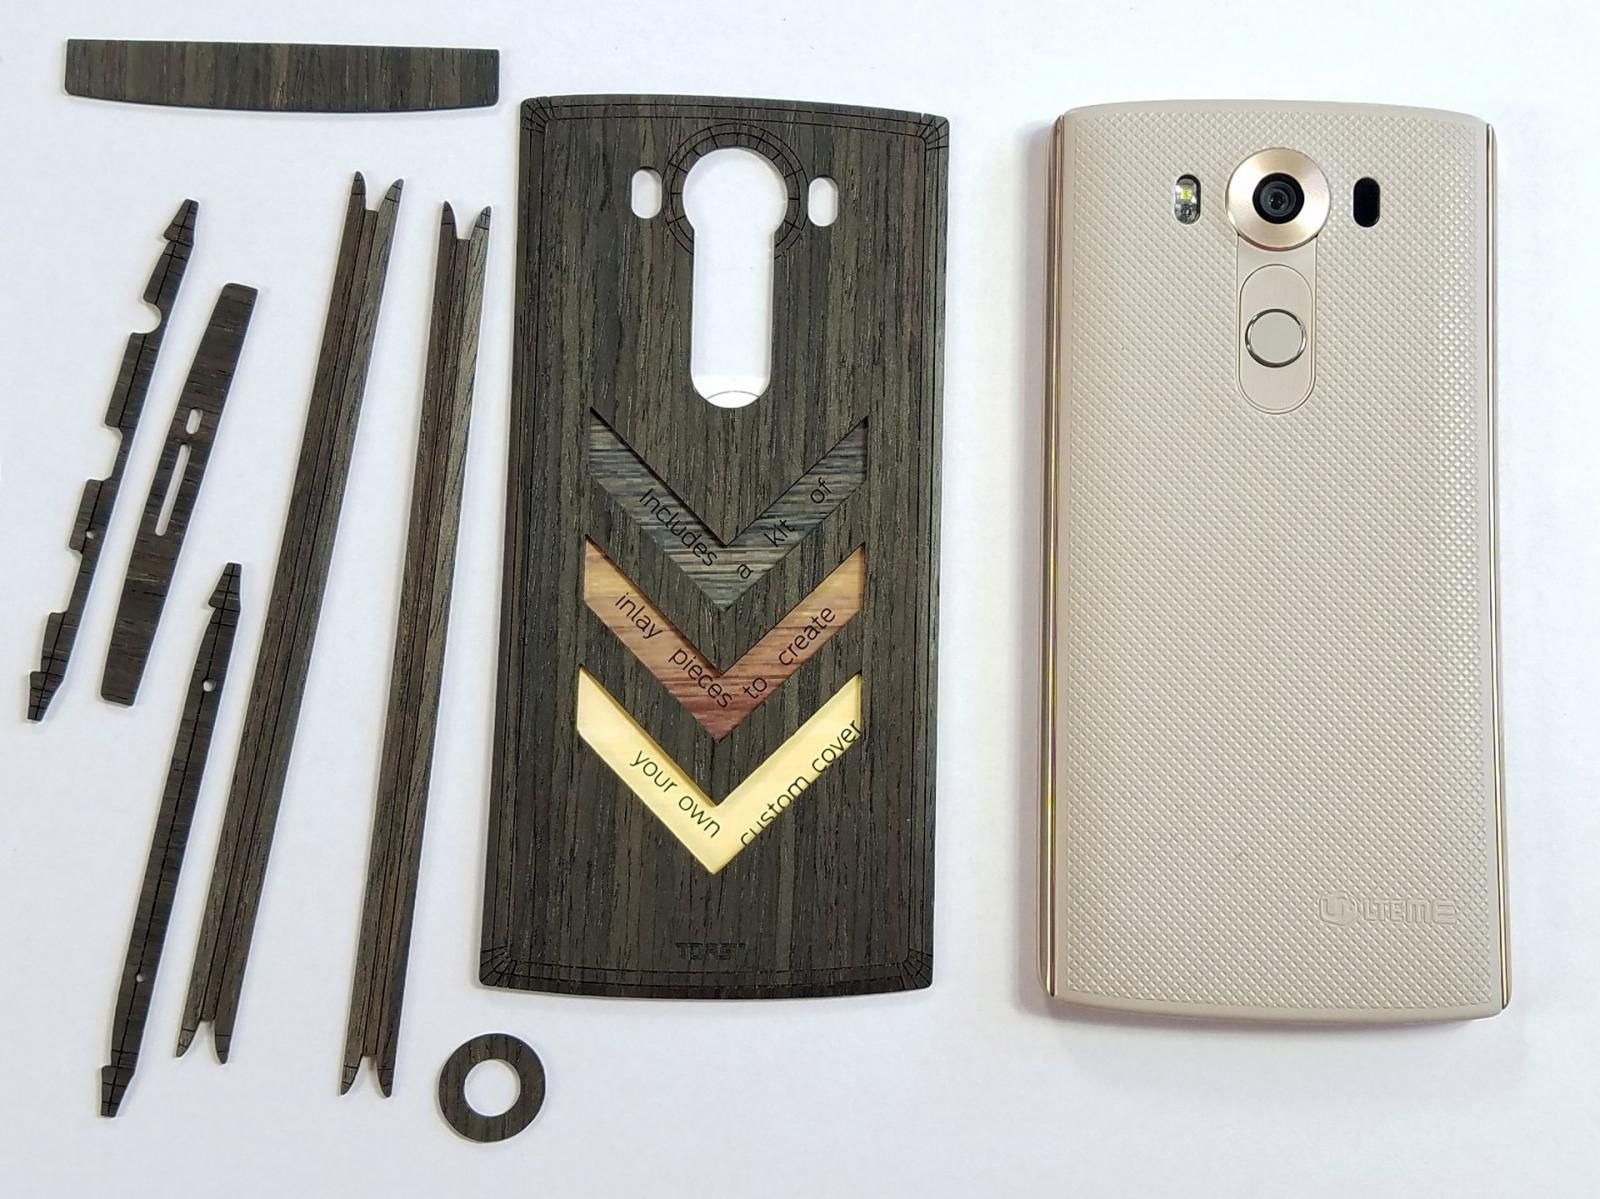 Toast Real Wood cover for LG V10 Review Pocketnow1 (18)